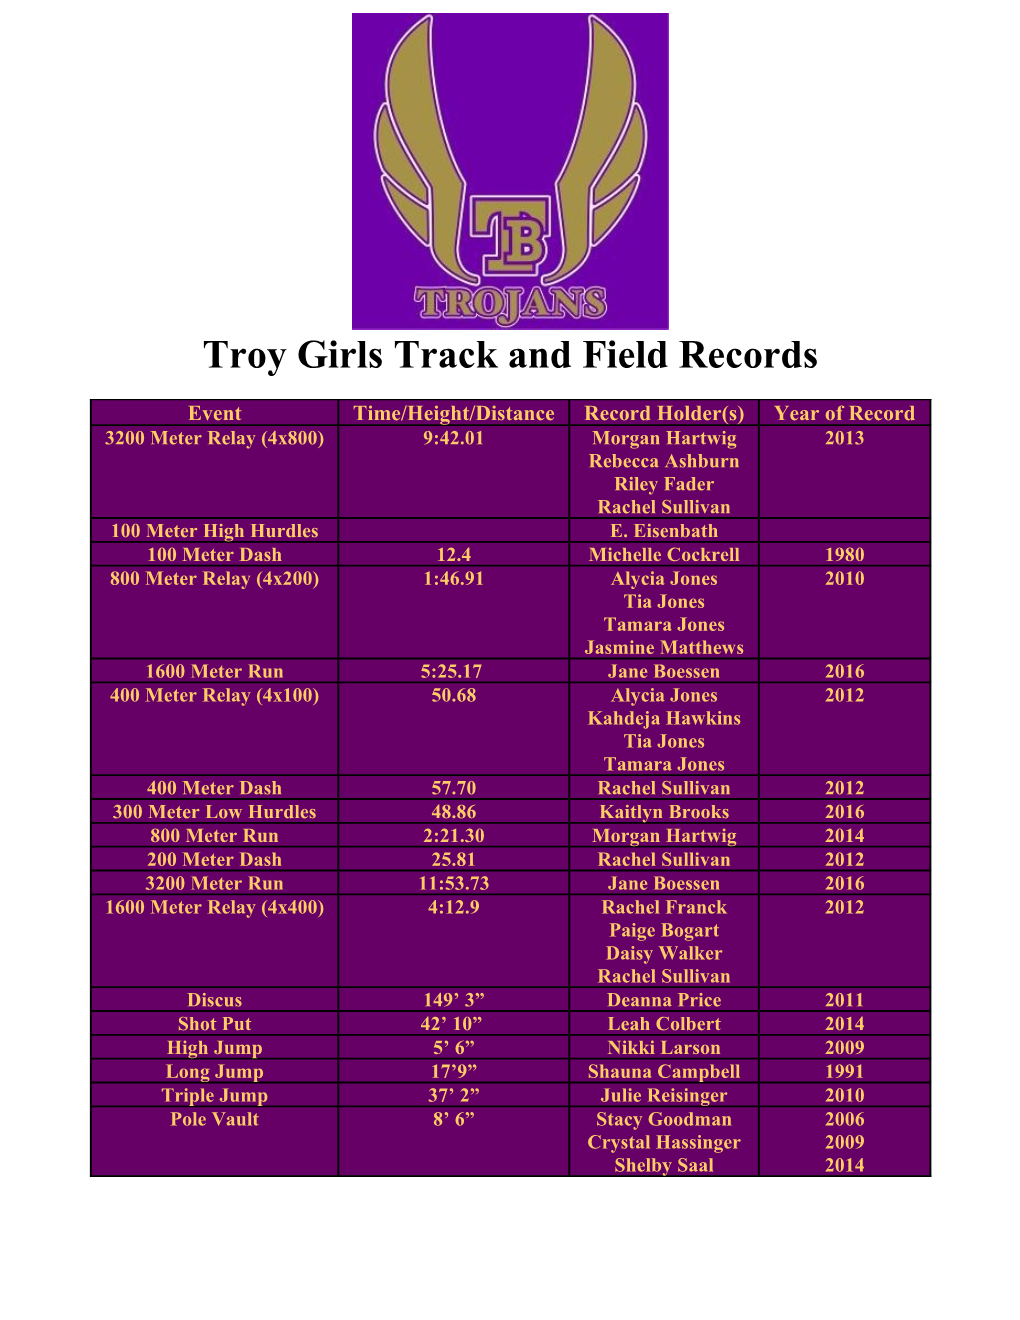 Troy Girls Track and Field Records